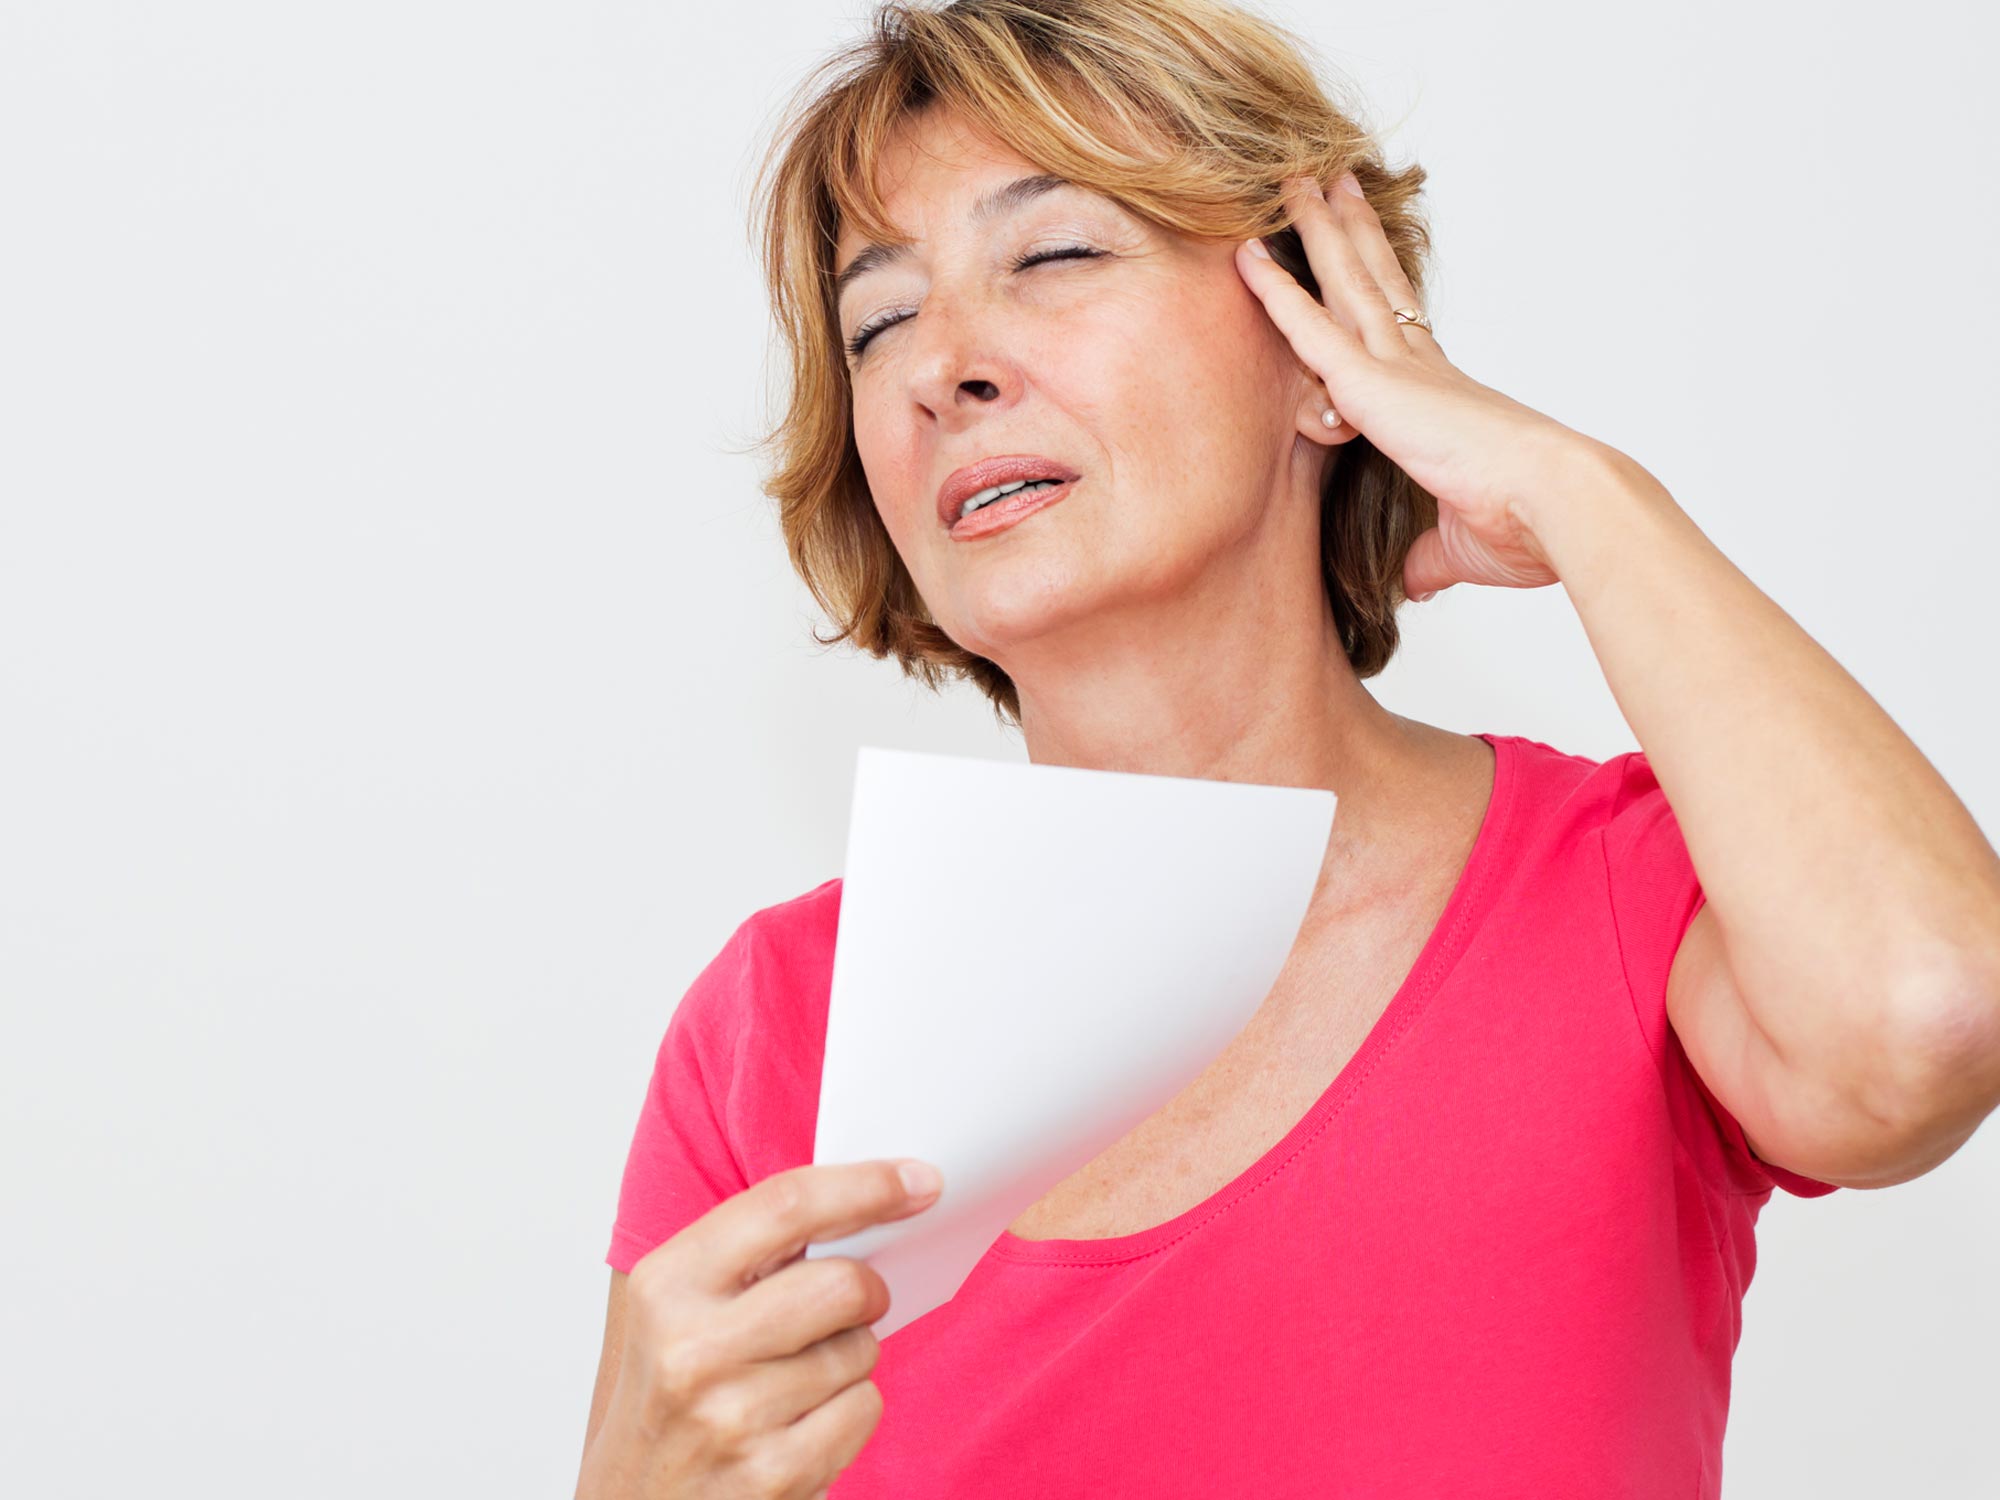 ‘Stick it’ to hot flashes for real relief